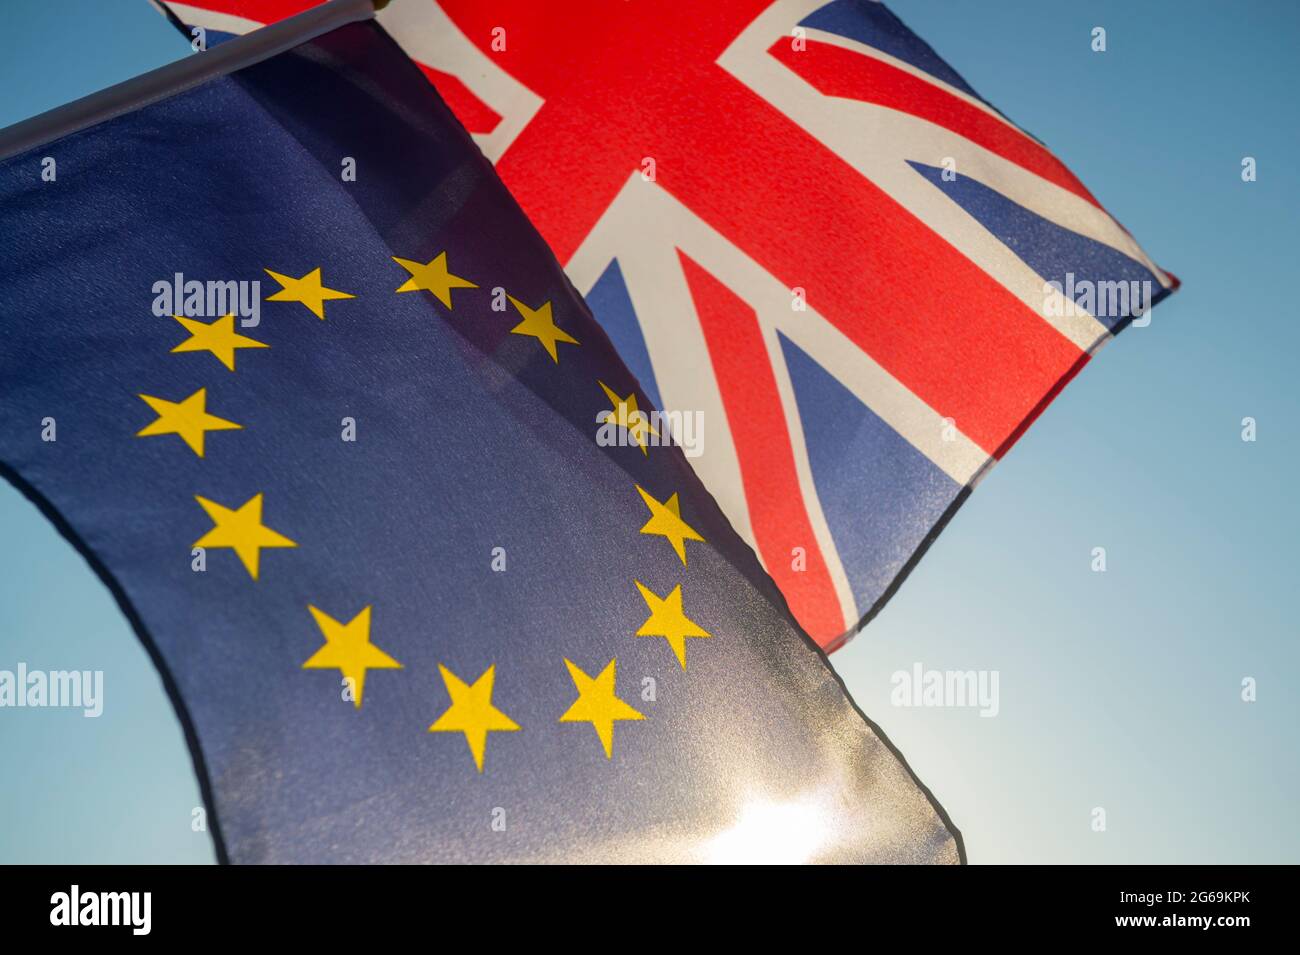 European Union and British Union Jack flag flying together in front of bright blue sky Stock Photo